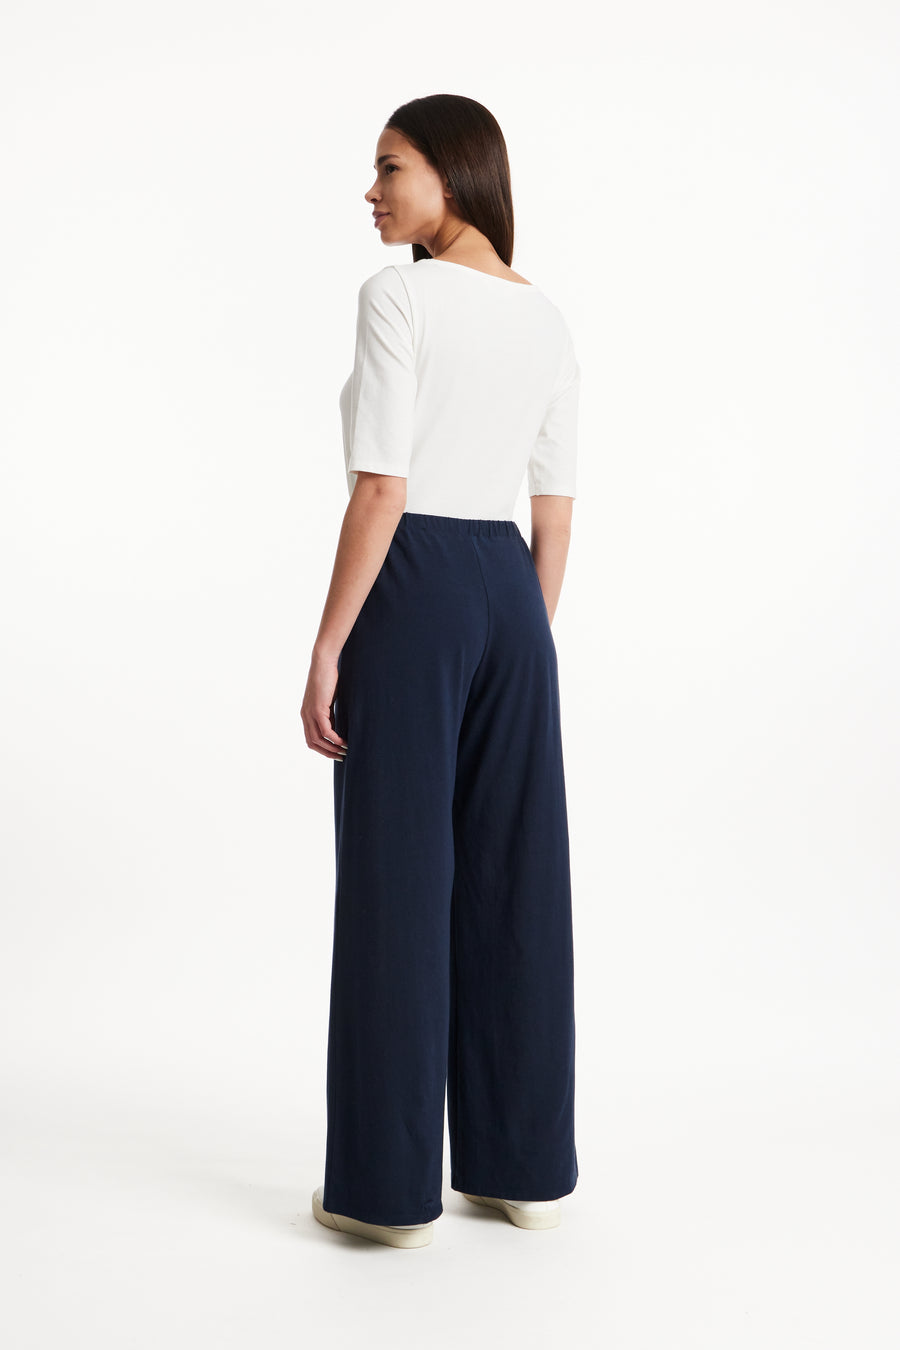 People Tree Fair Trade, Ethical & Sustainable Jacinta trousers in Navy 95% organic certified cotton, 5% elastane